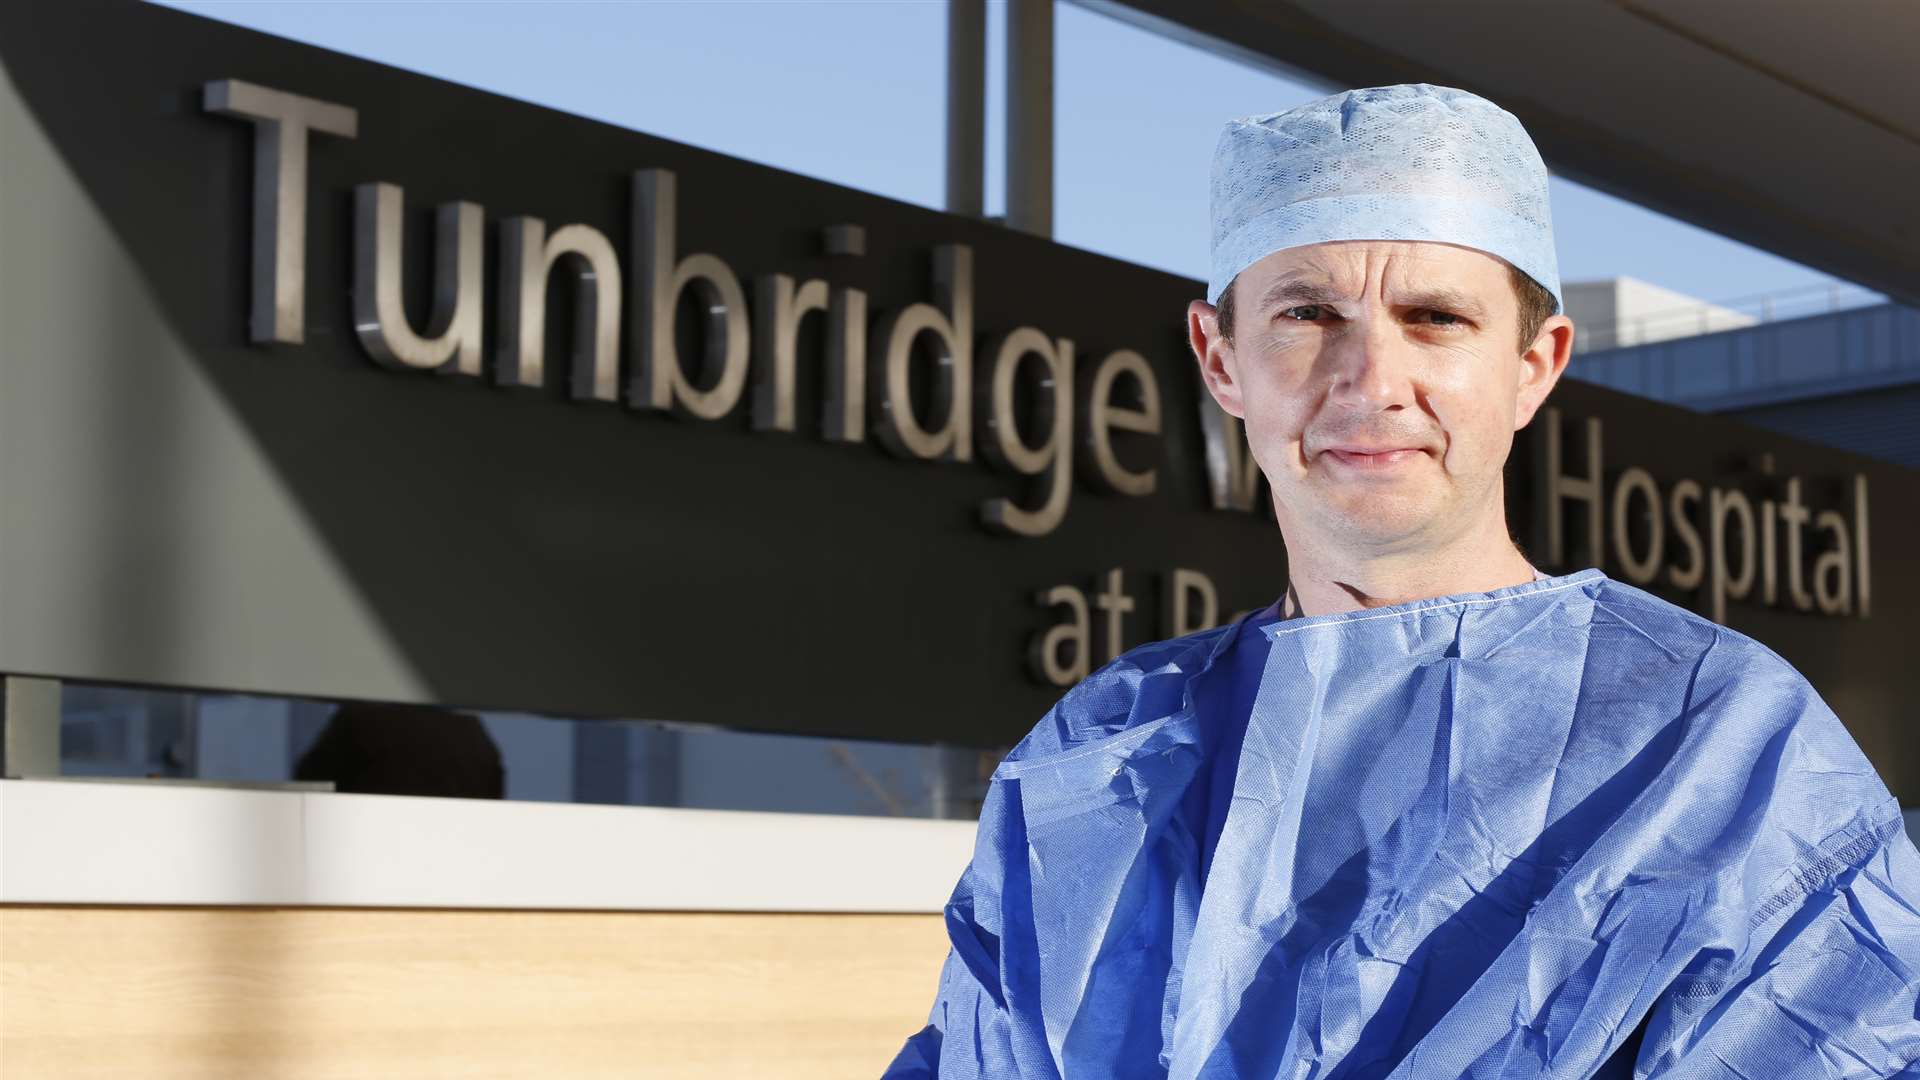 Dr Andy Taylor is a doctor at Tunbridge Wells and Maidstone hospitals